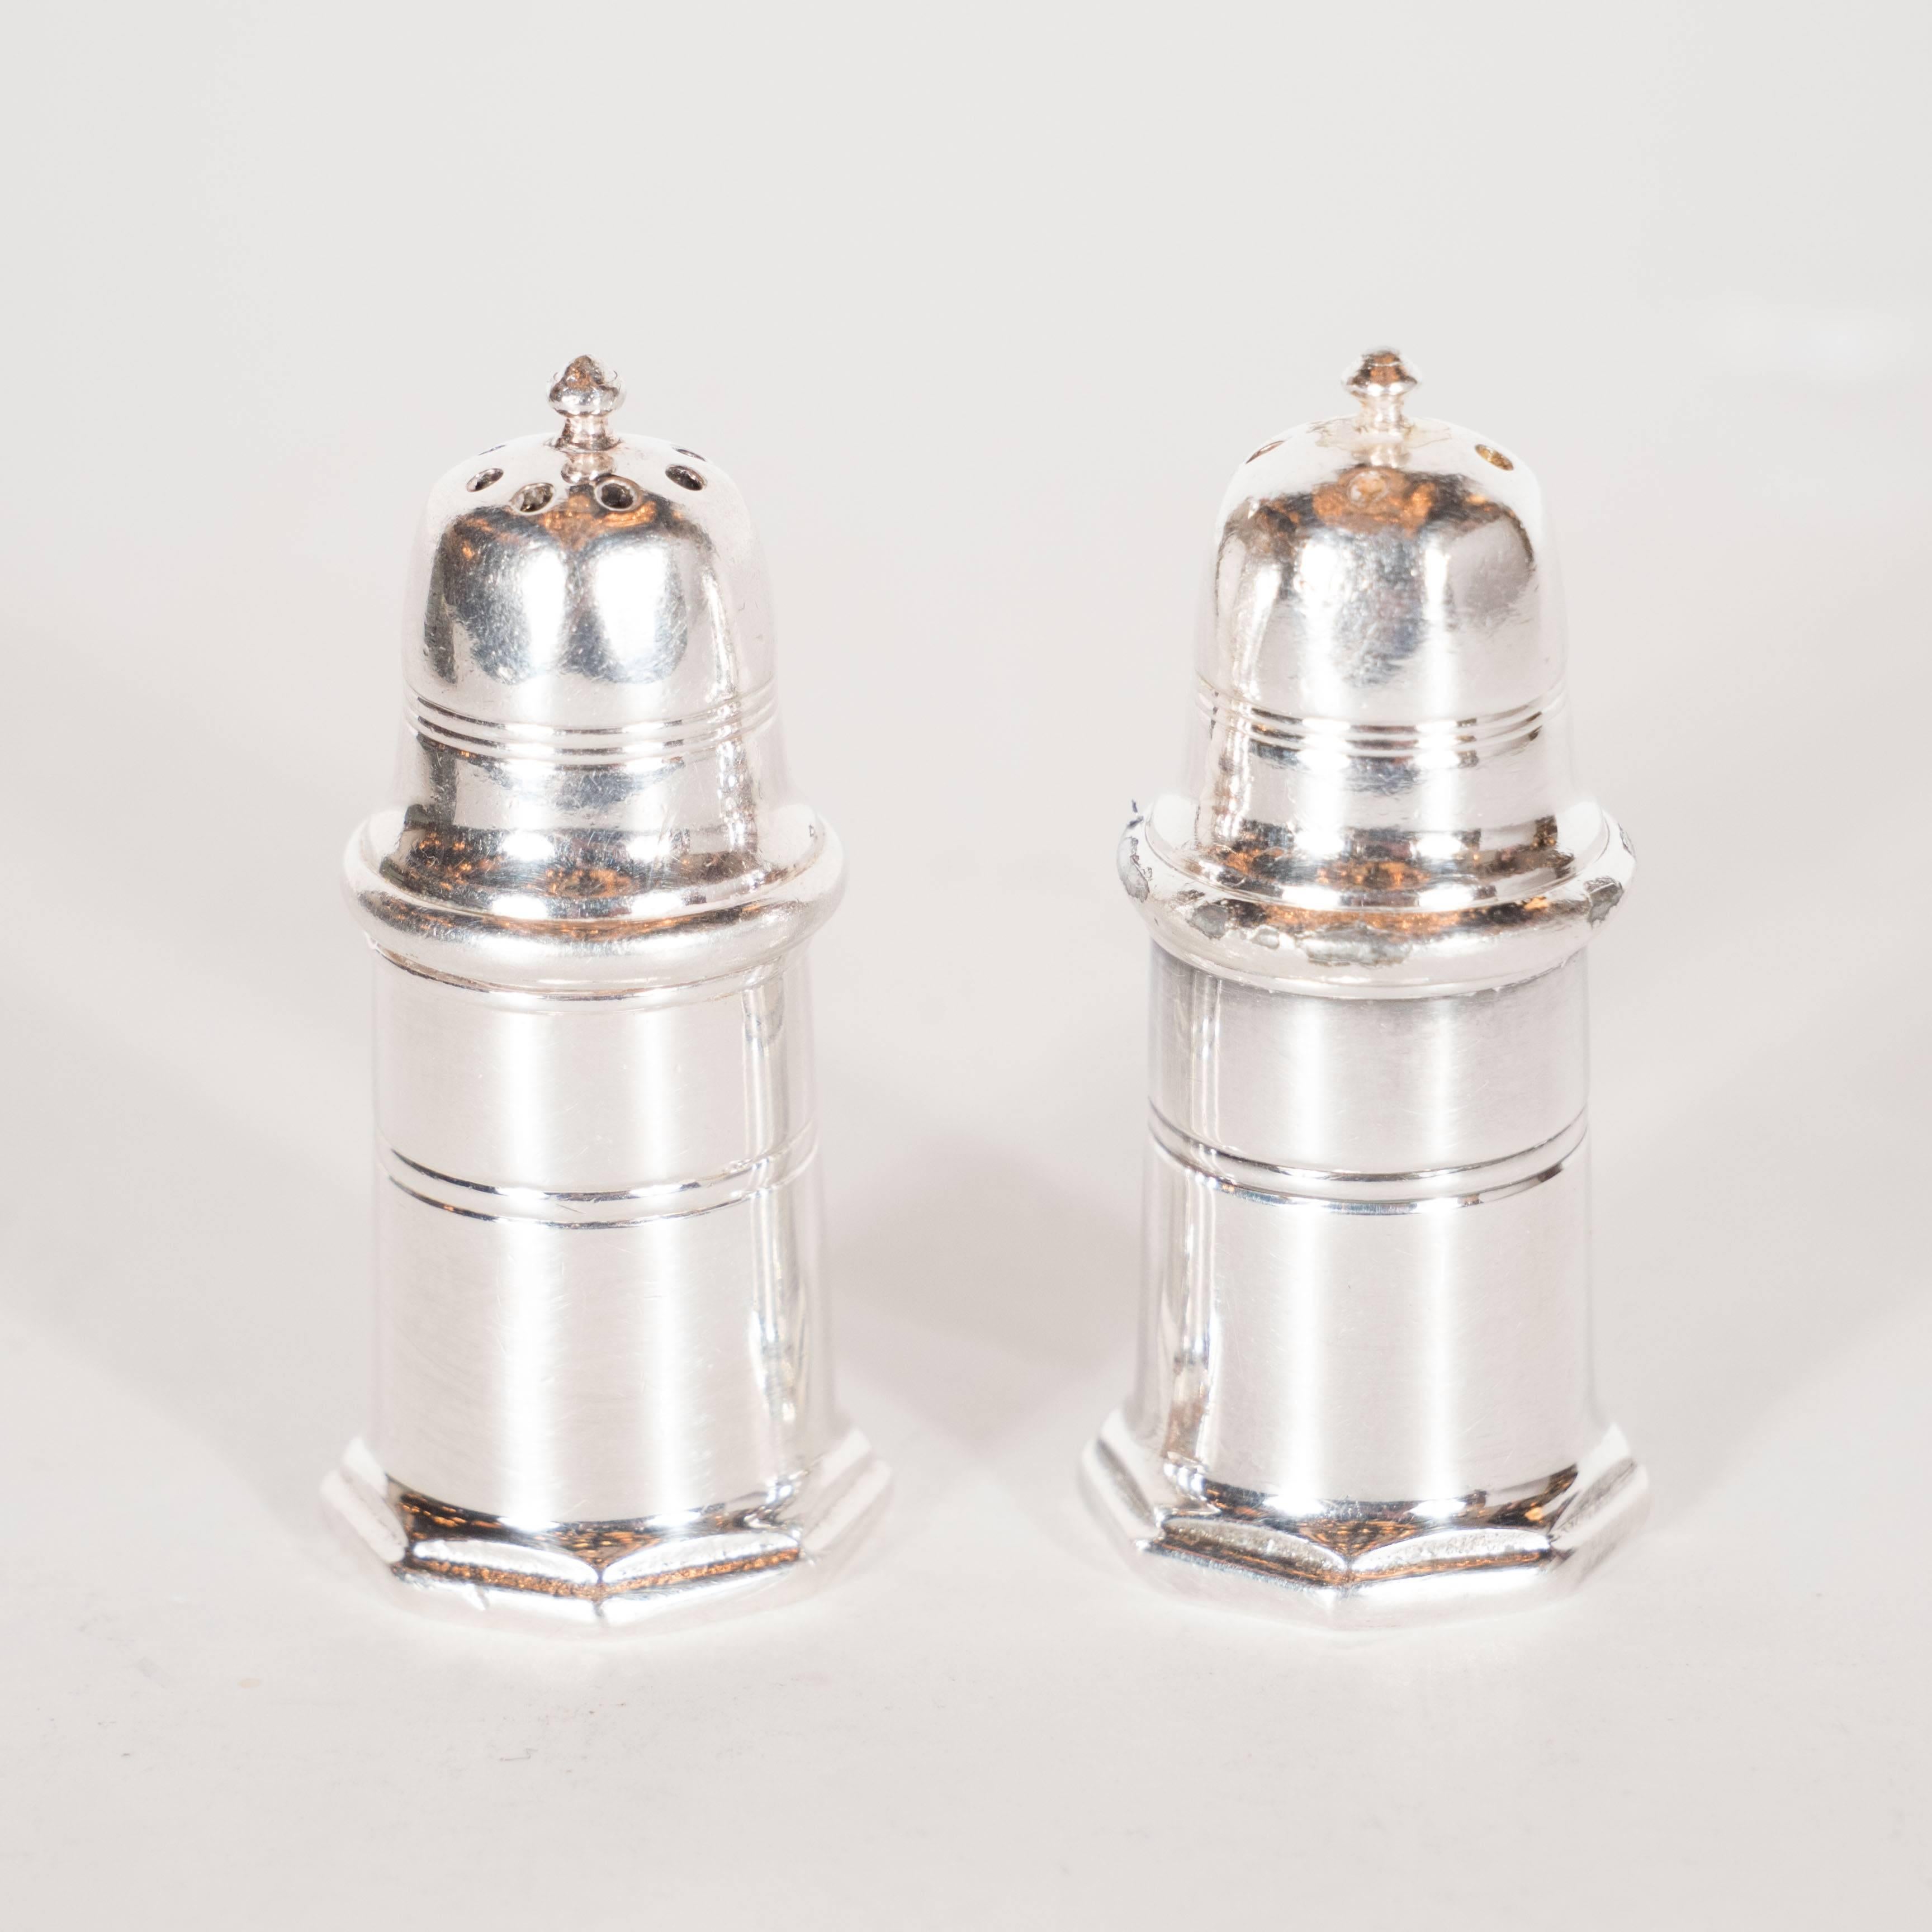 christofle salt and pepper shakers